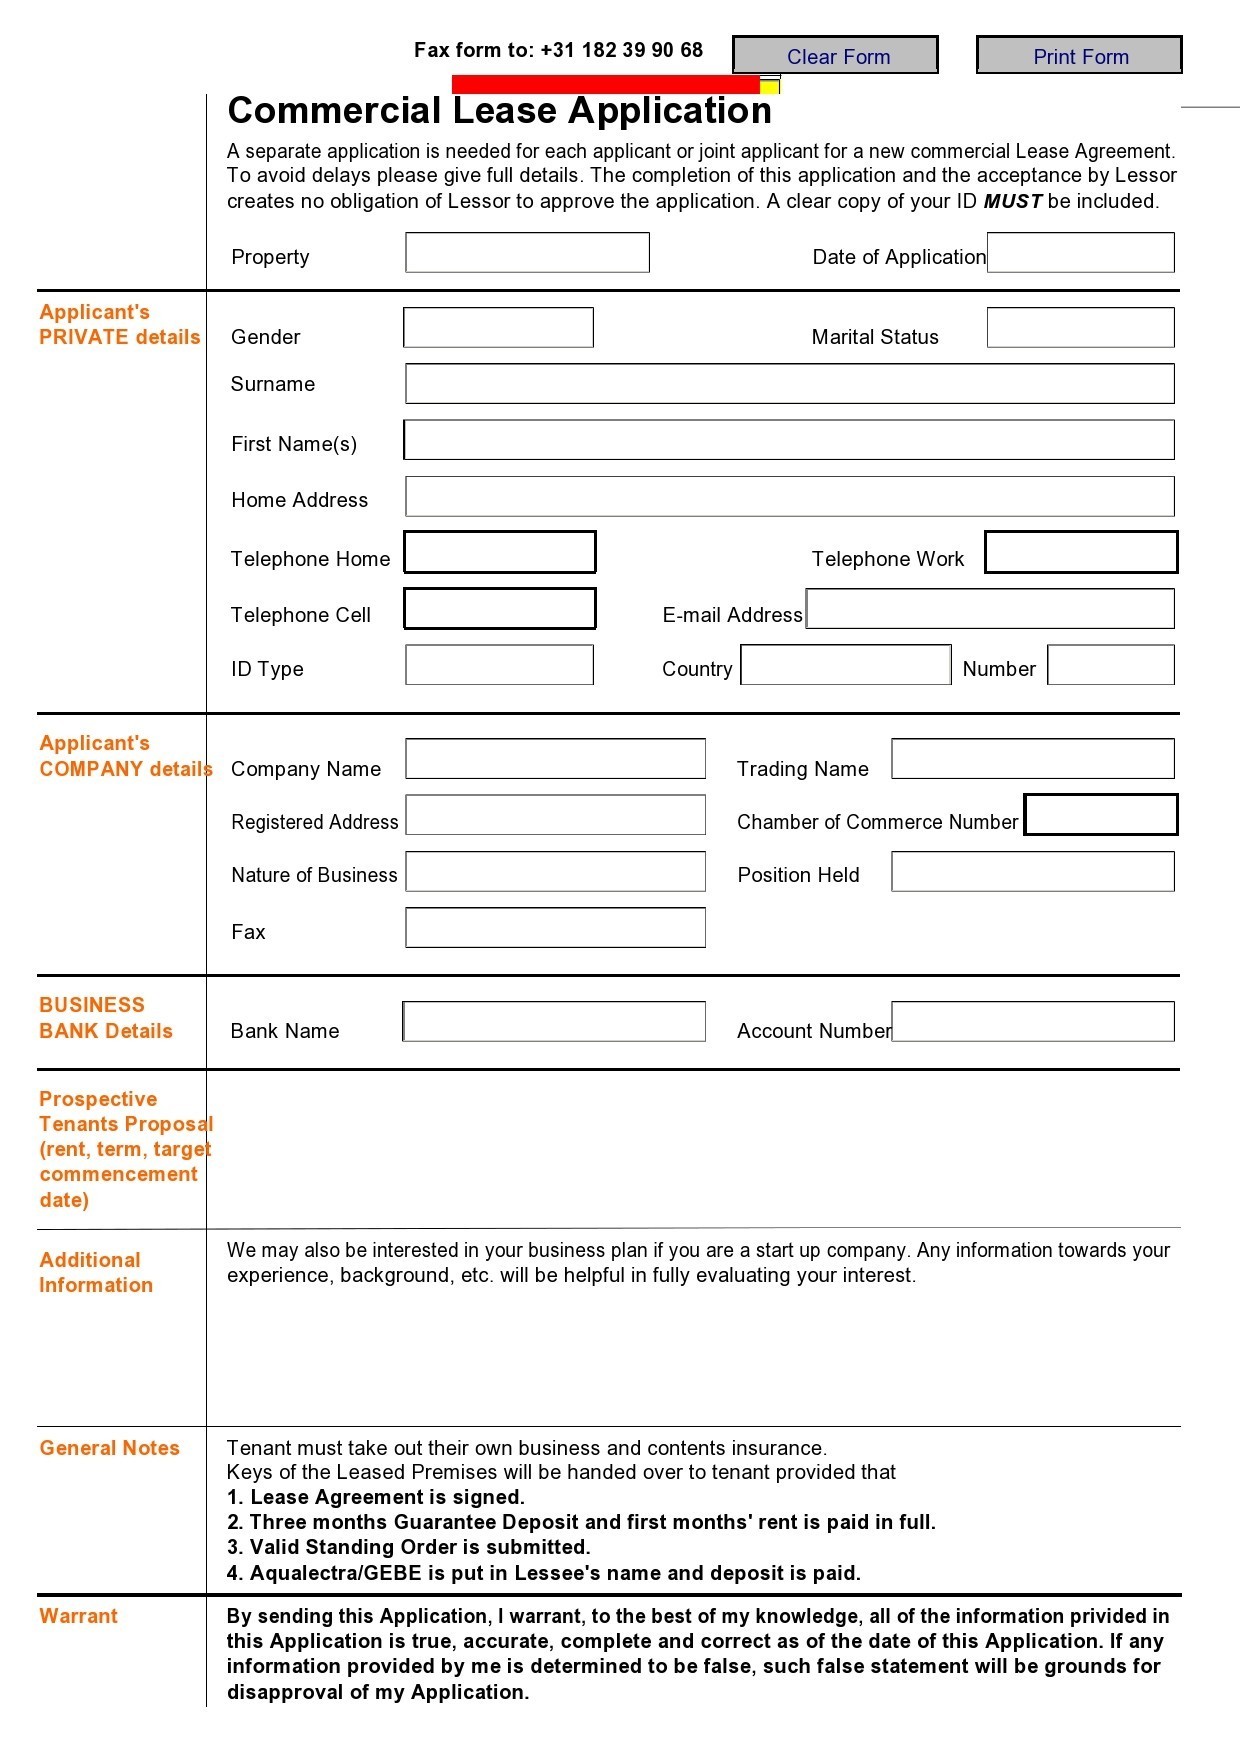 Free commercial lease application 26